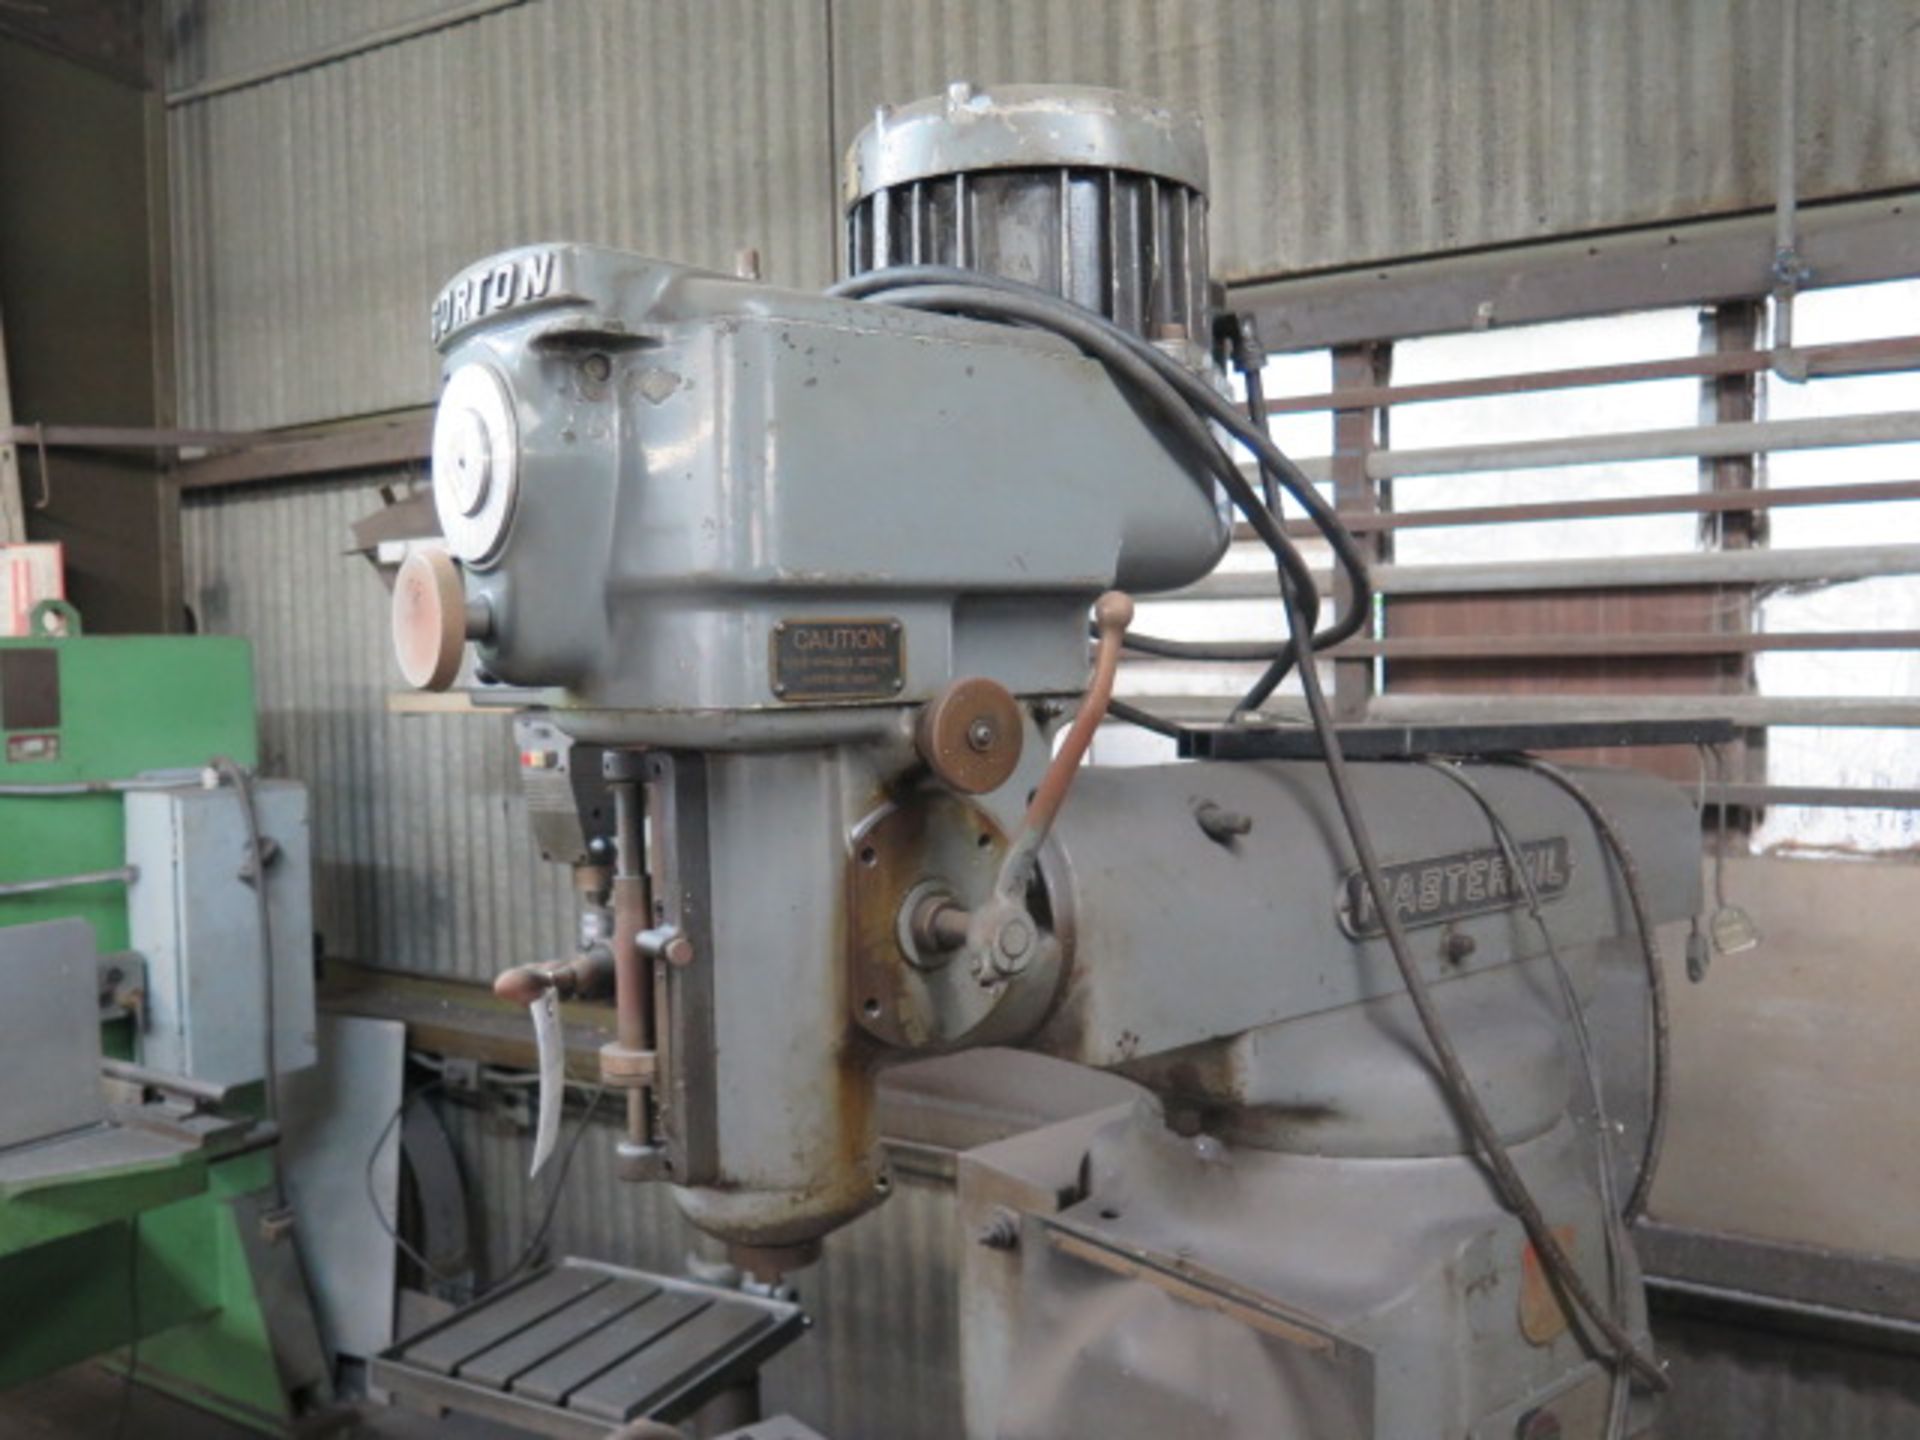 Gorton mdl. 1-22 “Mastermill” Vertical Mill w/ 80-5600 RPM, 40-Taper Spindle, SOLD AS IS - Image 4 of 9